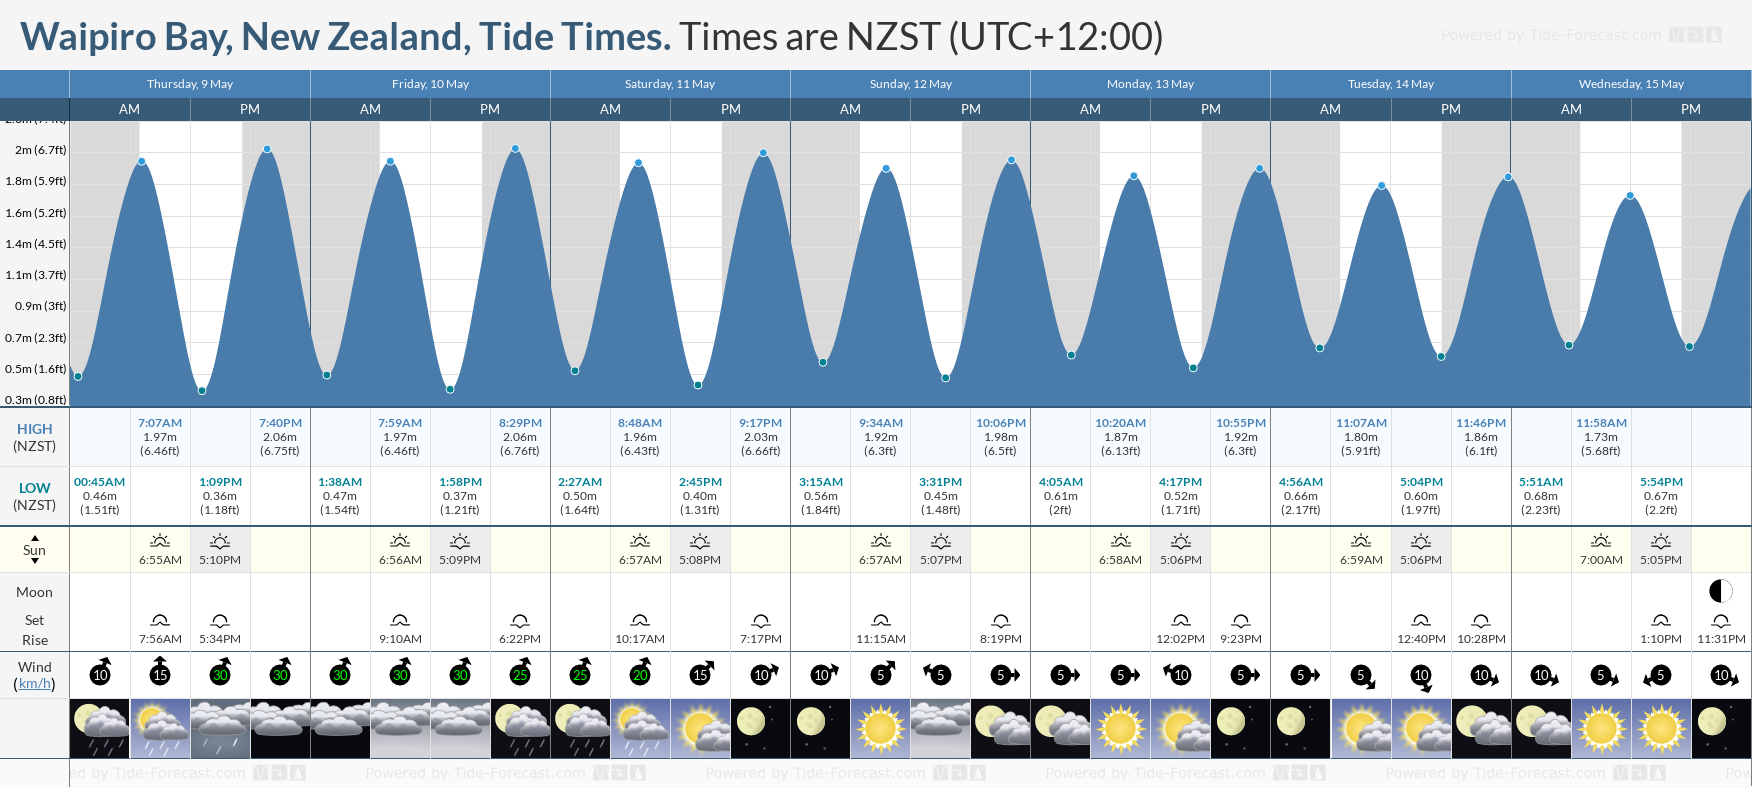 Waipiro Bay, New Zealand Tide Chart including high and low tide tide times for the next 7 days